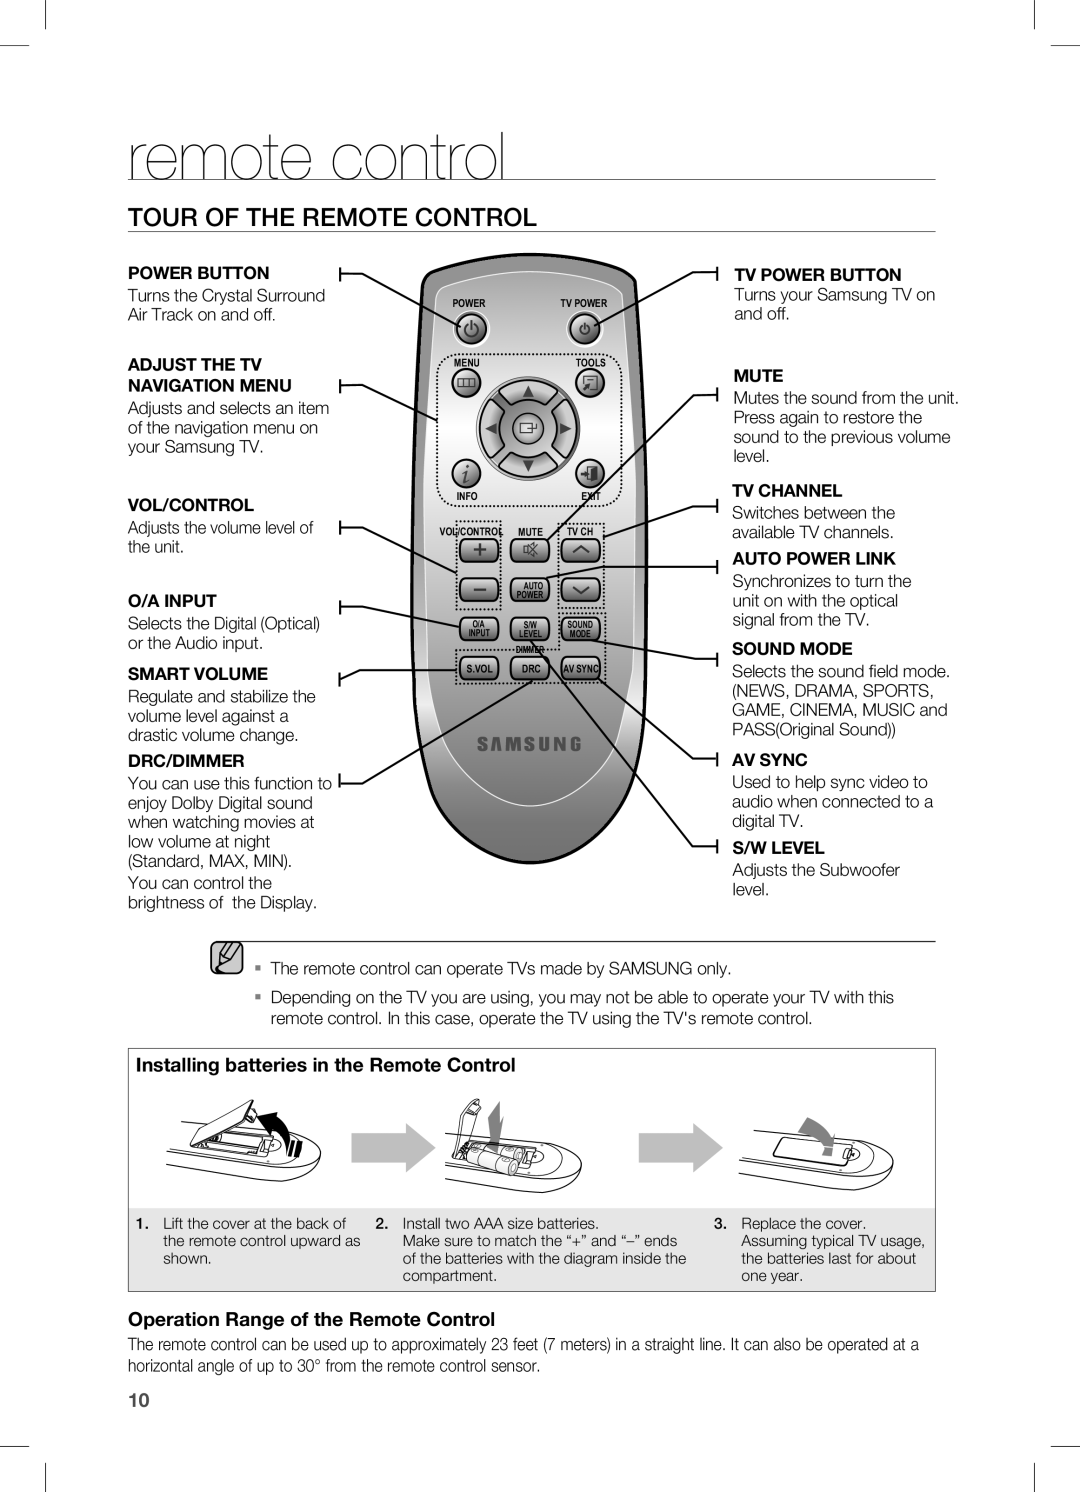 Samsung HW-C450, HW-C451 user manual remote control, Tour of the Remote Control, Installing batteries in the Remote Control 